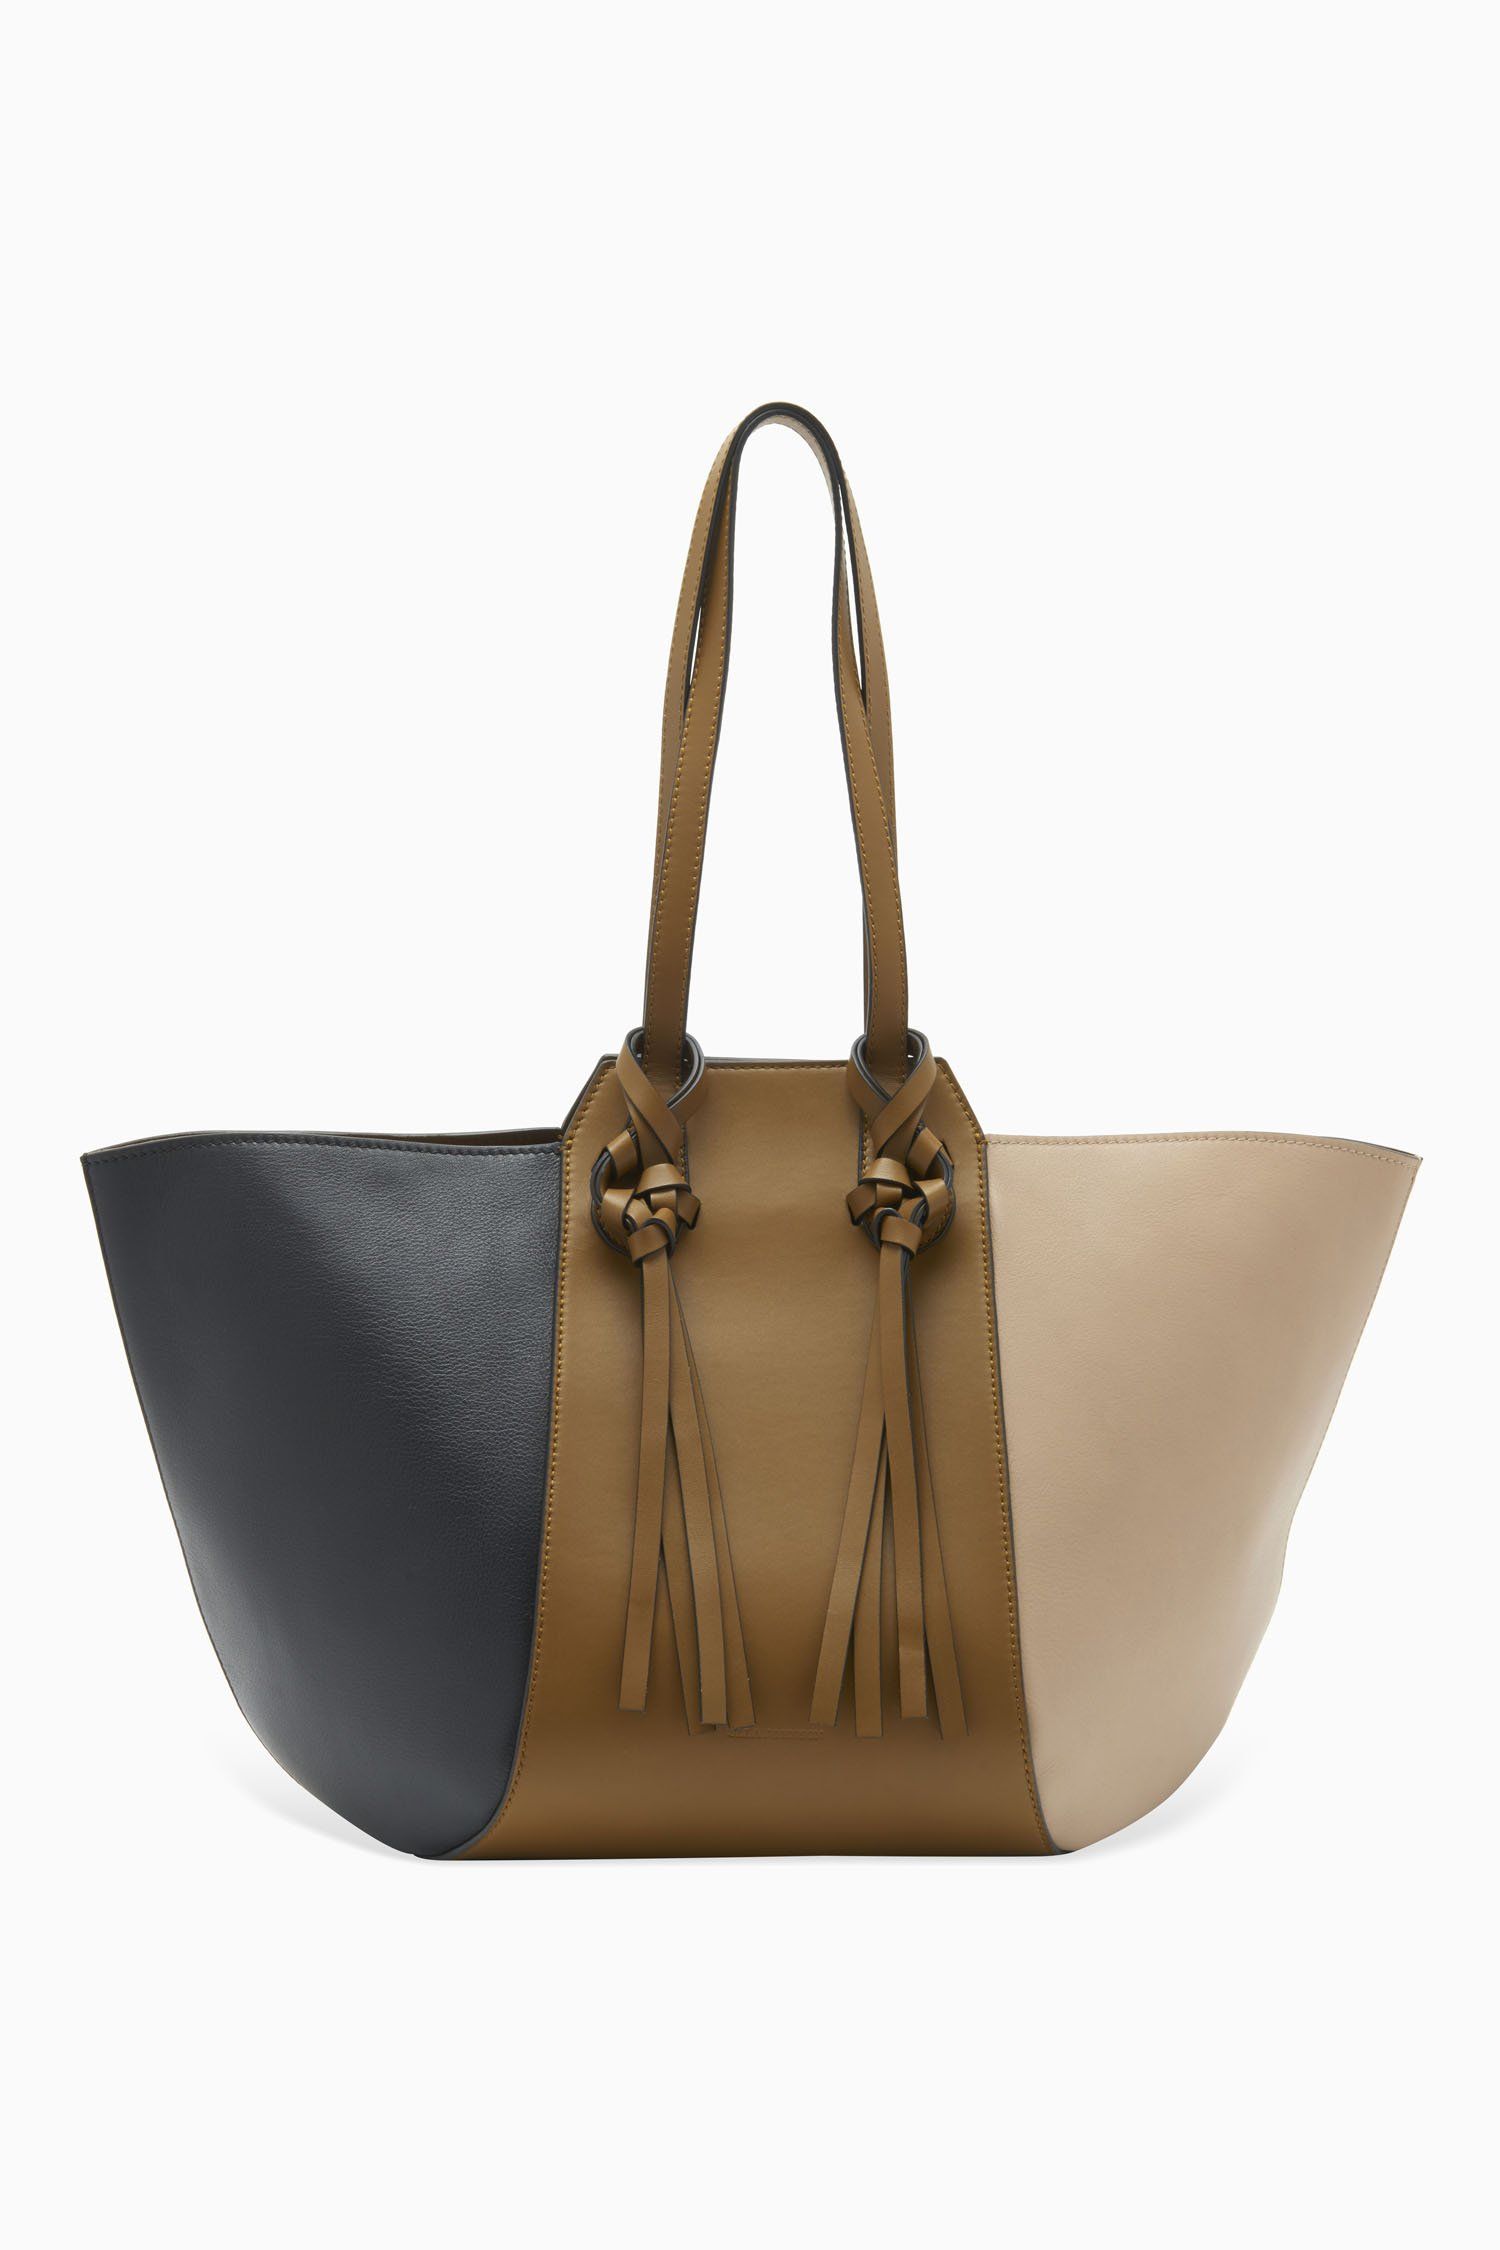 Imogen Large Carryall Tote